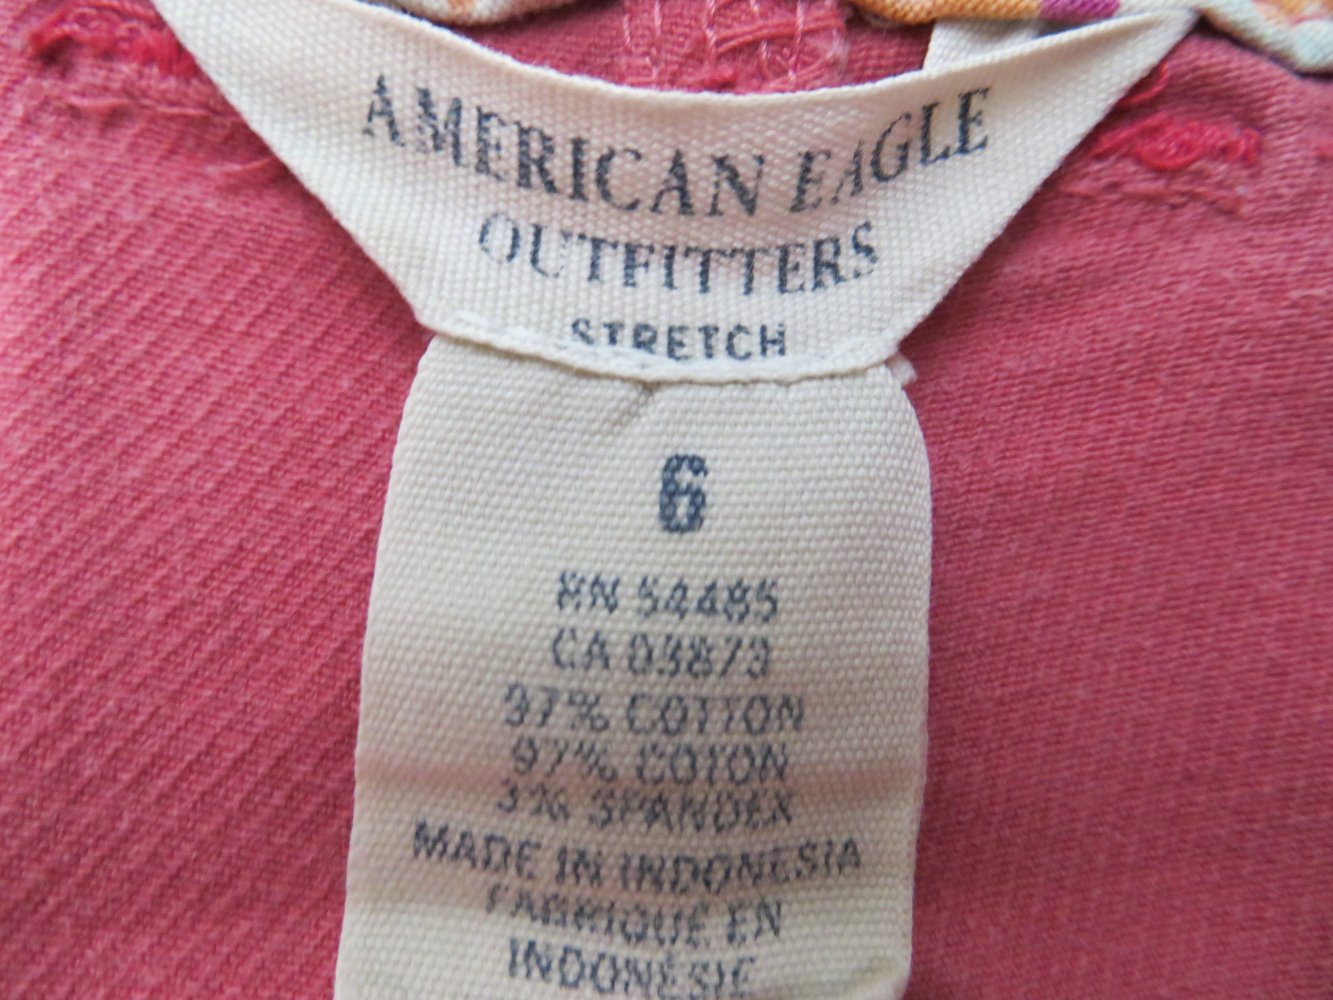 Jeansshorts von American Eagle Outfitters